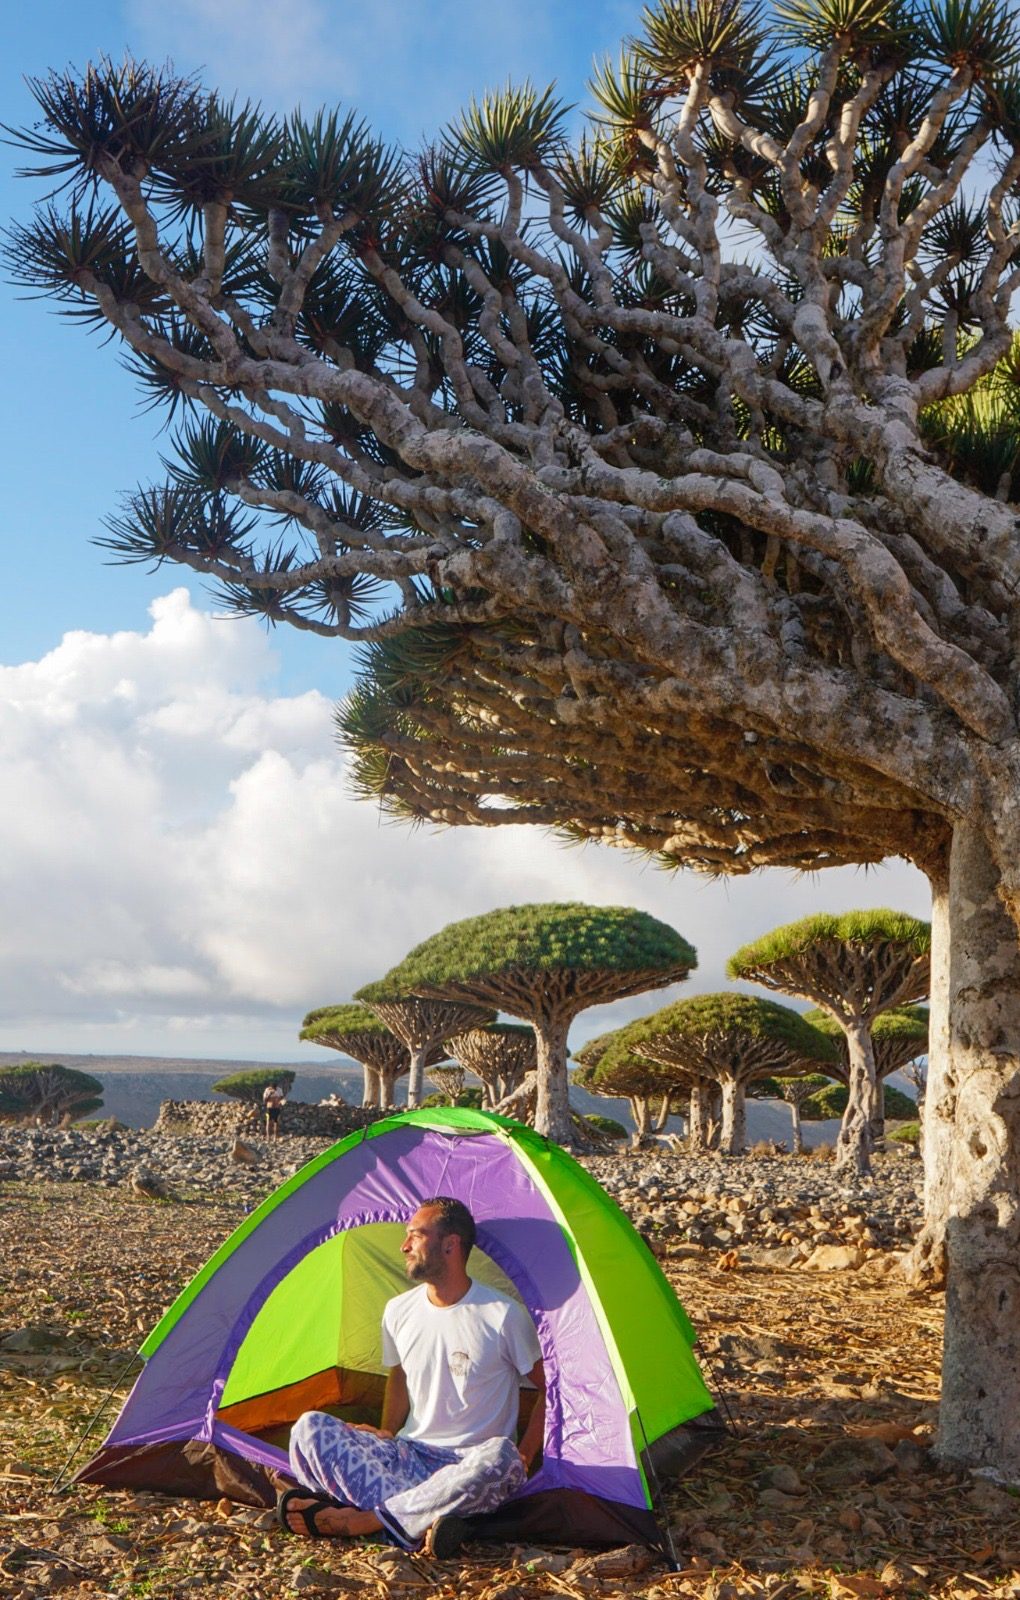 Socotra Truly a once in a lifetime adventure, and I'm excited